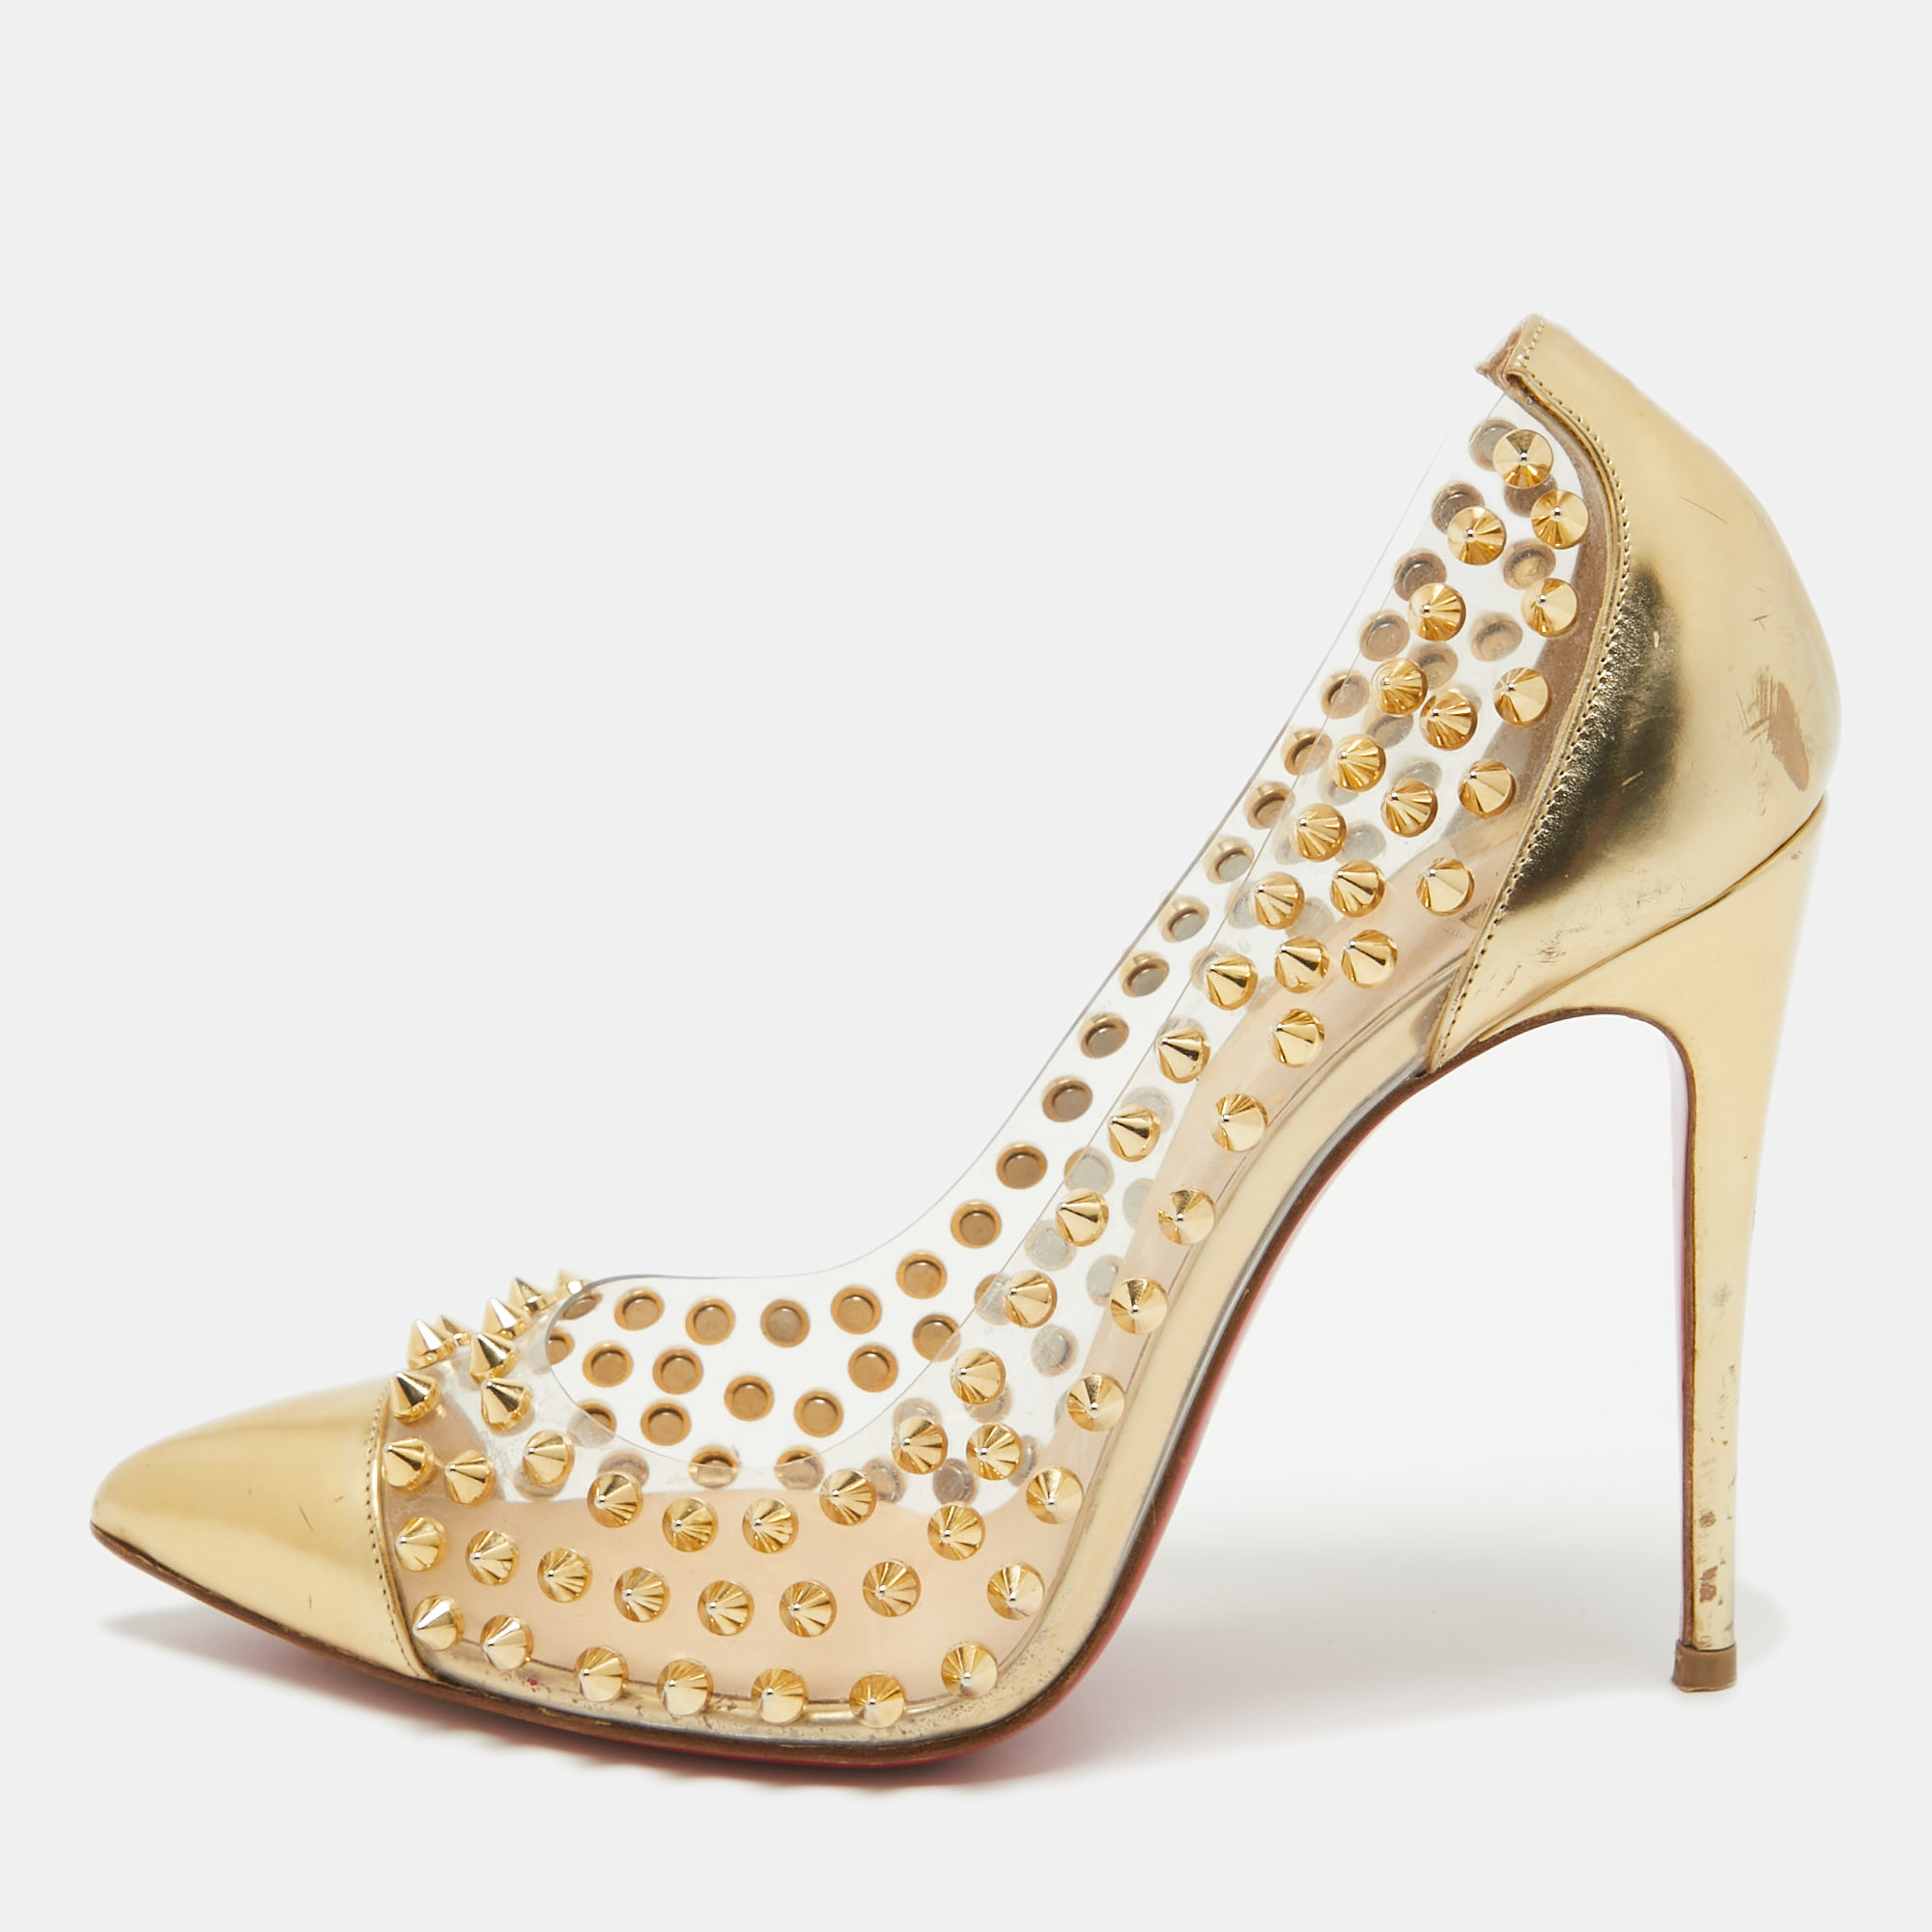 Christian louboutin gold leather and pvc spike me pumps size 37